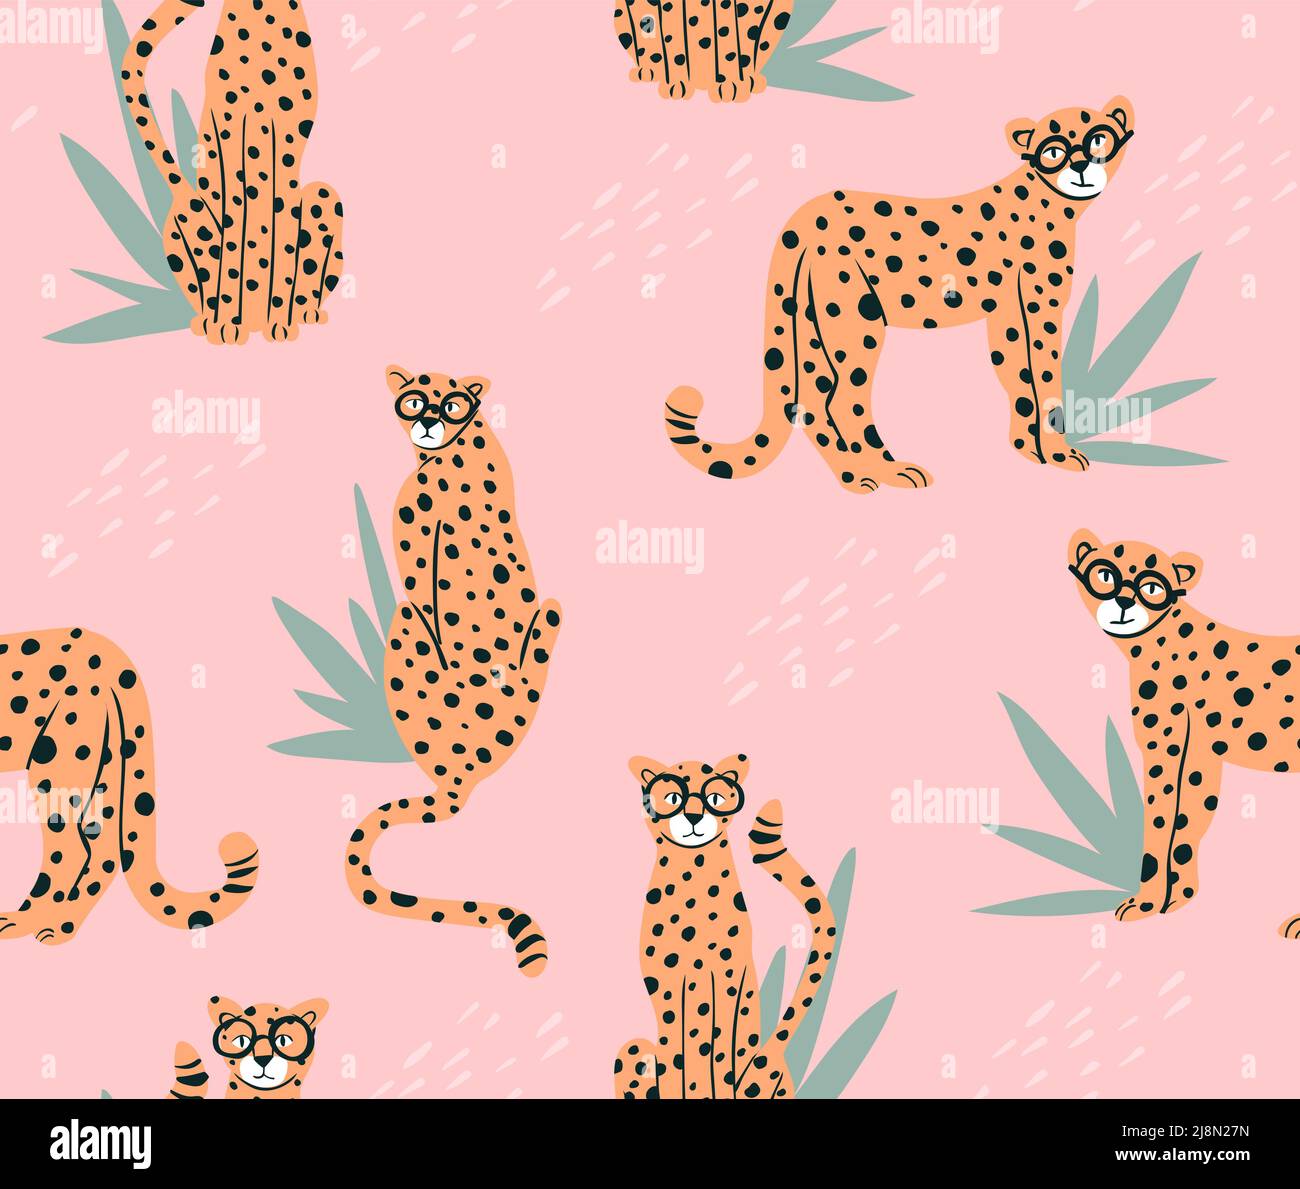 https://c8.alamy.com/comp/2J8N27N/cute-hipster-cheetah-seamless-pattern-pink-leopard-tropical-background-perfect-for-creating-fabrics-textiles-wrapping-paper-packaging-2J8N27N.jpg